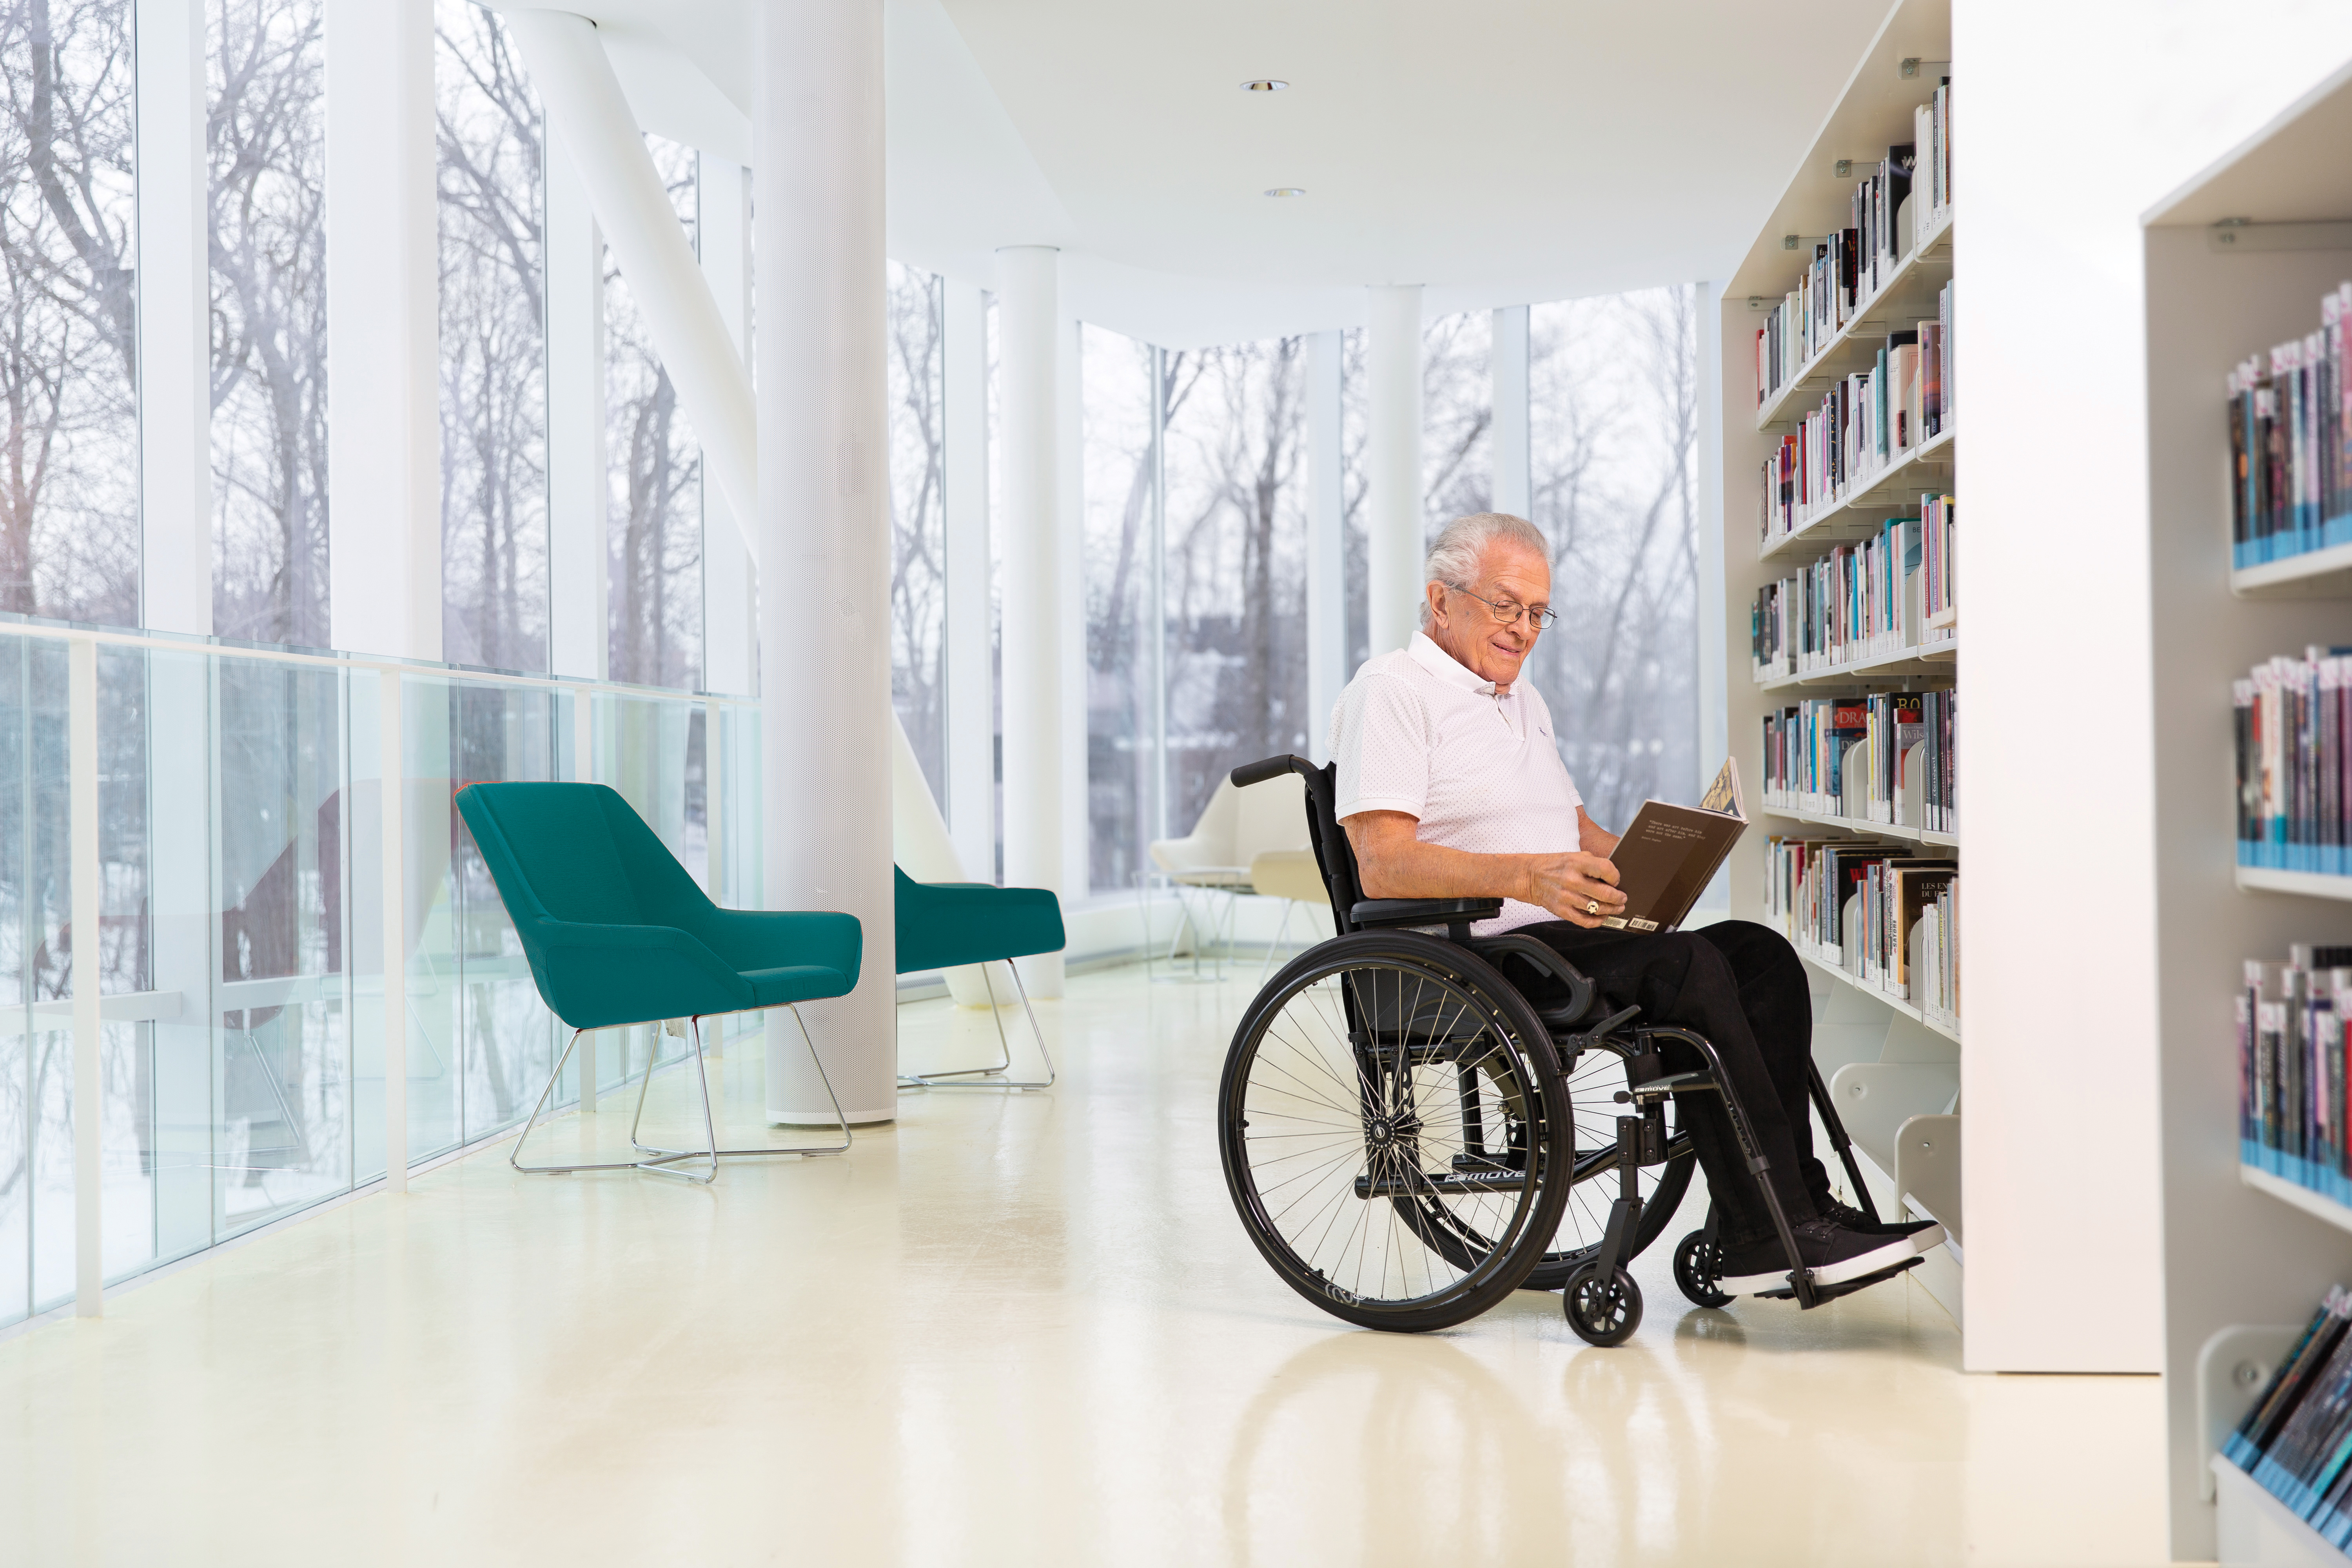 A senior man sits smiling in his Move wheelchair. He's reading a book in a brightly lit space in front of a shelf of books. There are windows behind him with a view to leafless trees. The space is painted white with pillars visible in the distance.